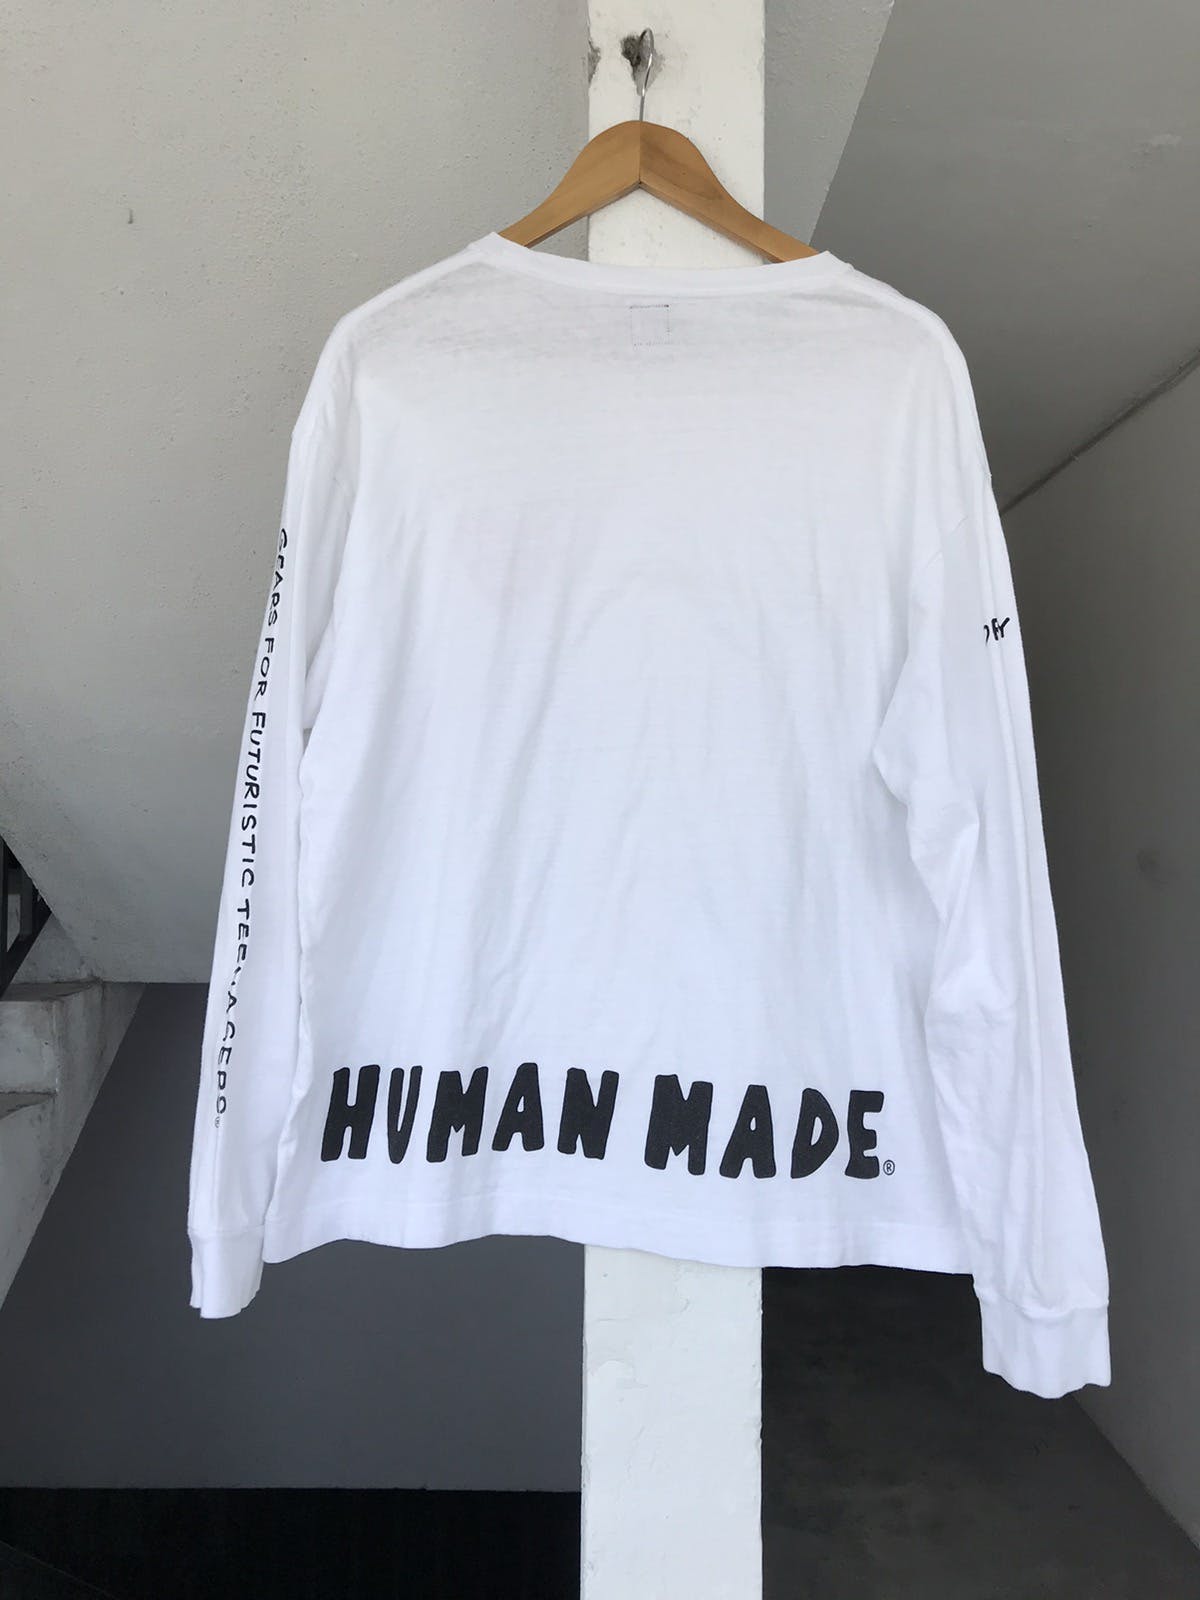 HumanMade Dry all Long Sleeve - 5